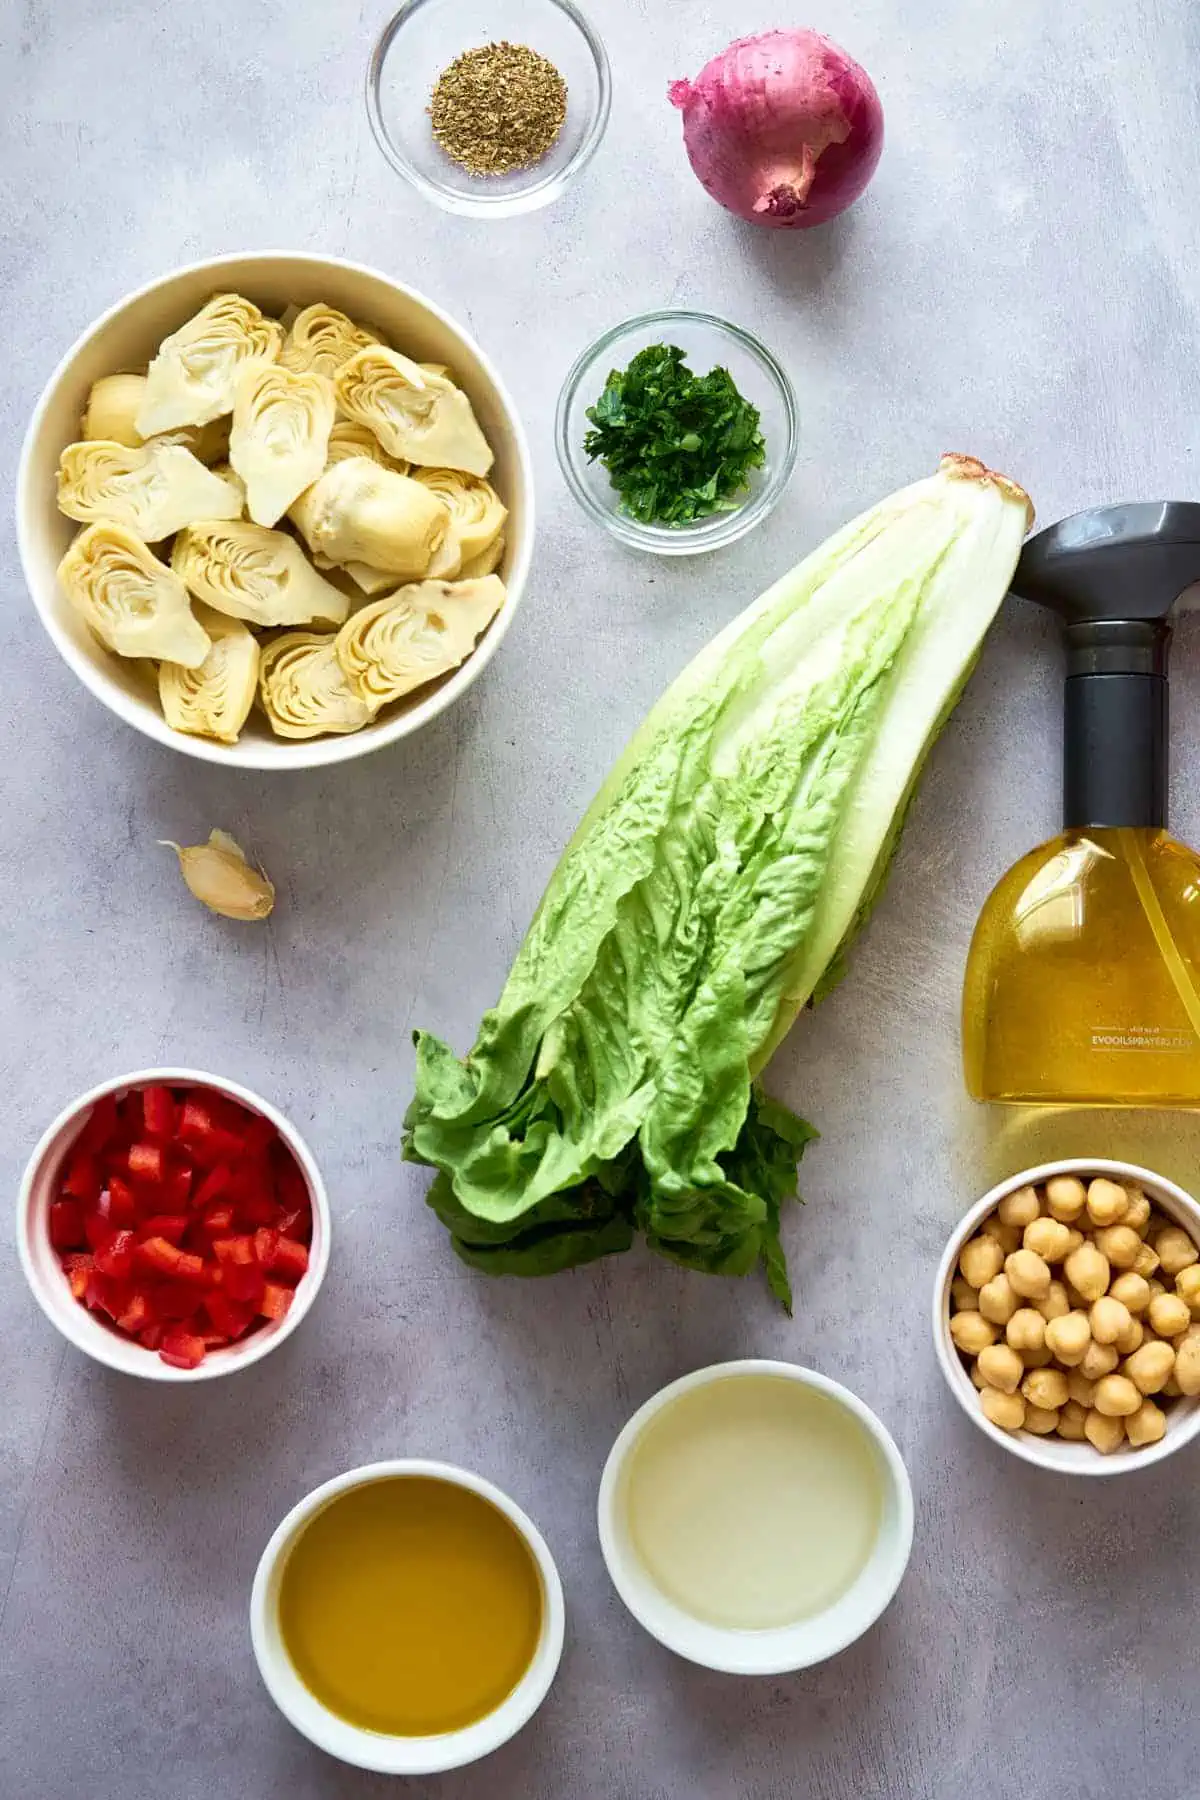 Ingredients to make this healthy salad.